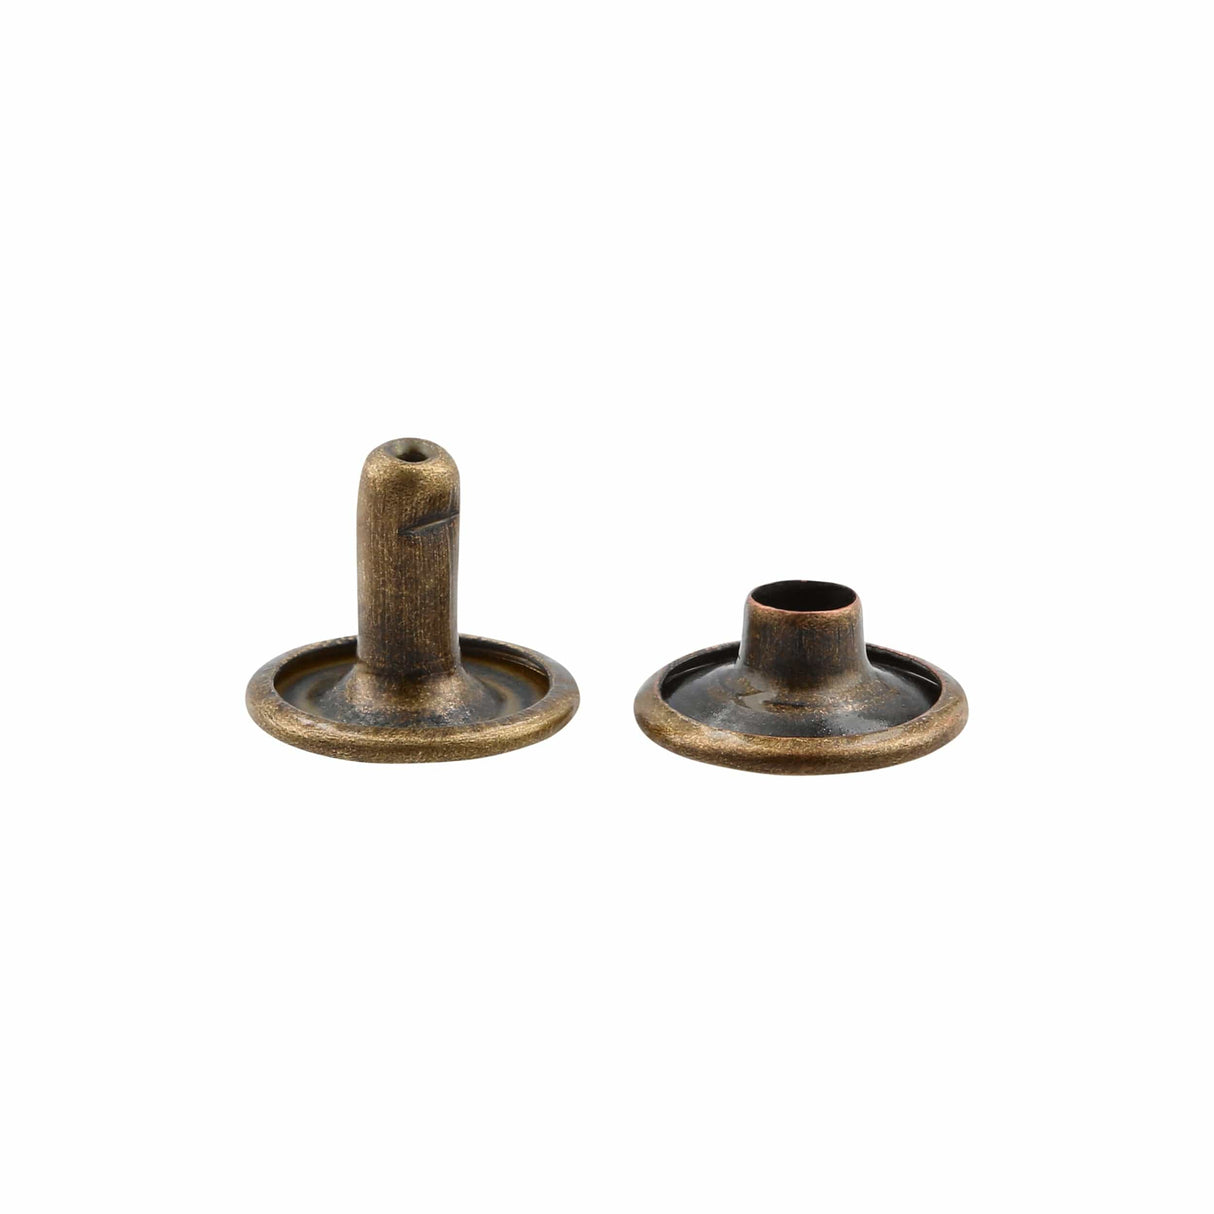 Ohio Travel Bag Fasteners 7mm Antique Brass, Double Cap Jiffy Rivets, Steel, #A-312-ANTB A-312-ANTB